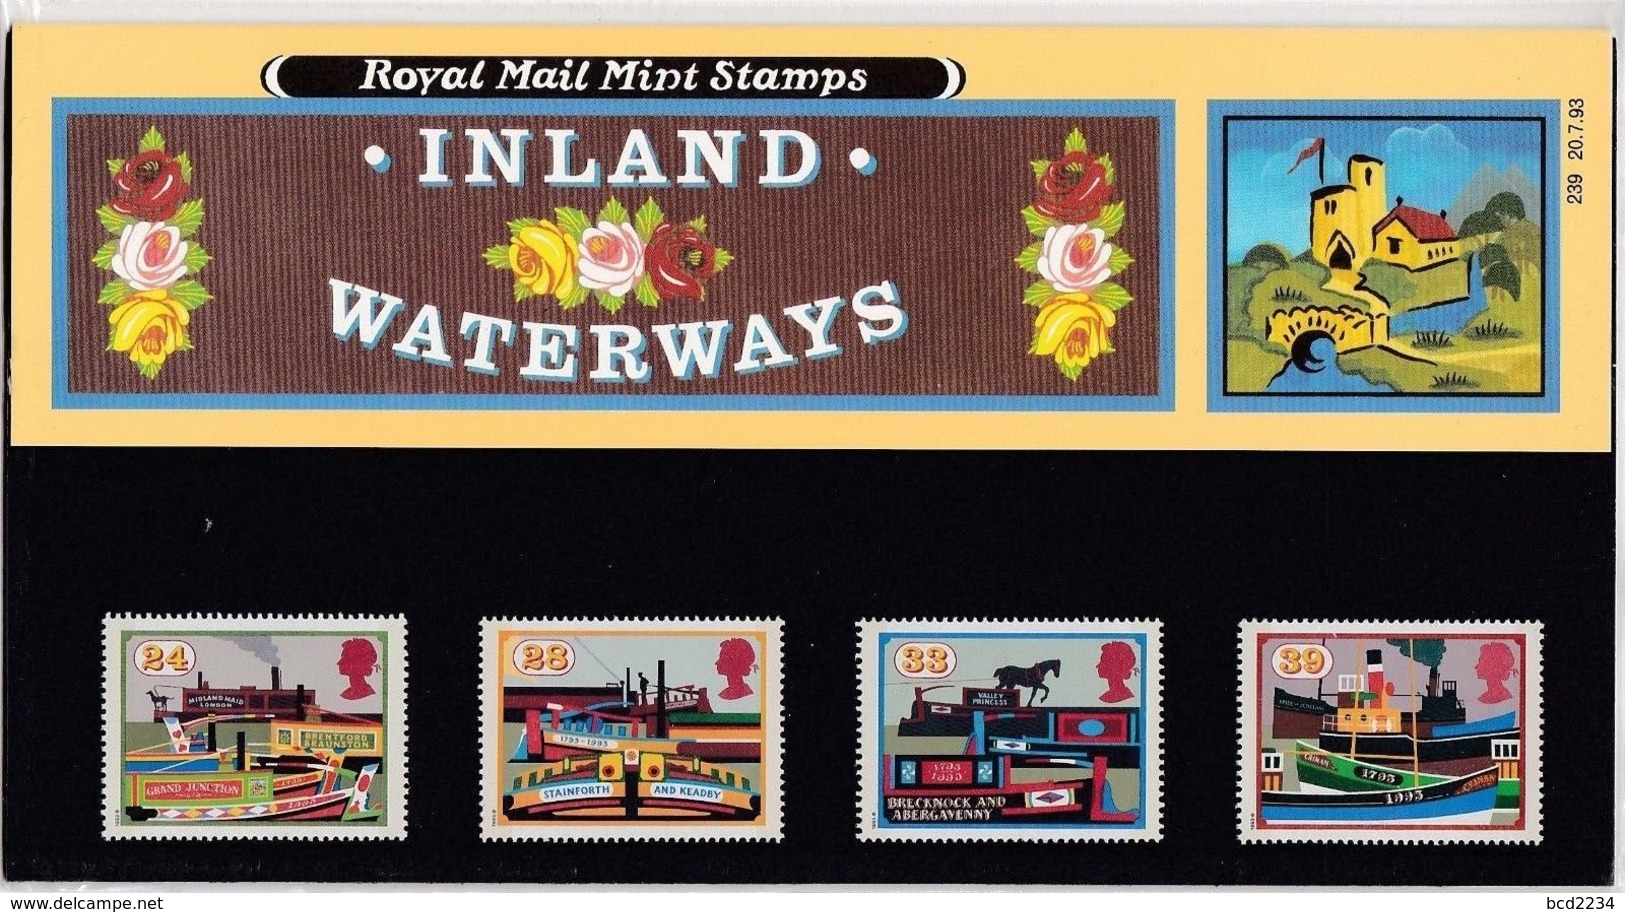 GB GREAT BRITAIN 1993 INLAND WATERWAYS PRESENTATION PACK No 239 +ALL INSERTS HORSES BARGE BOATS STEAM SHIPS BARGES HORSE - Bateaux